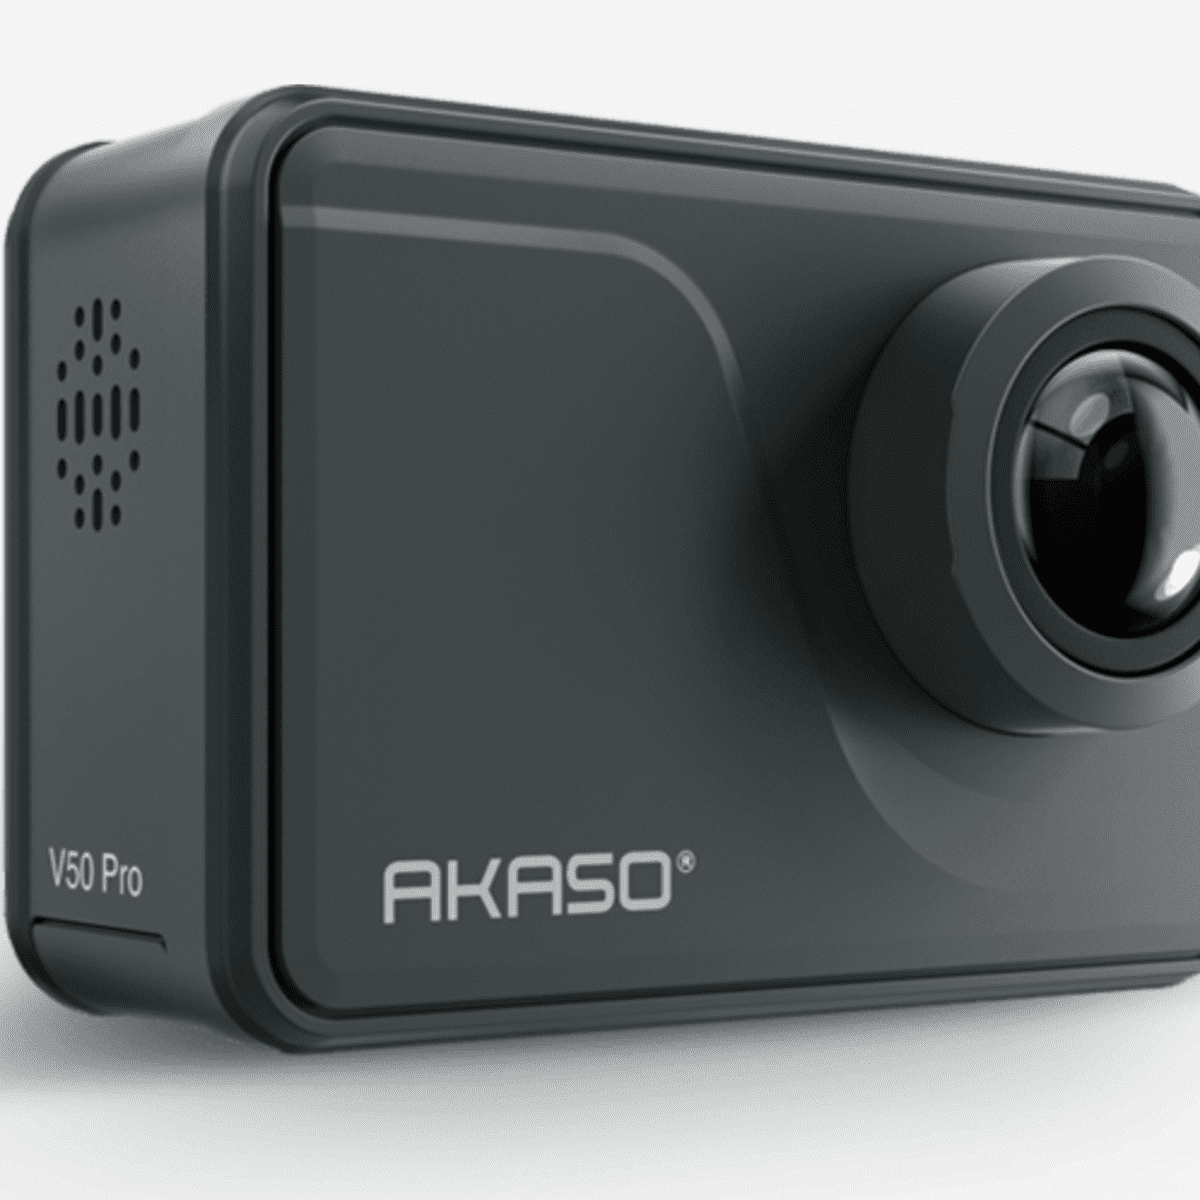 Akaso V50 Pro review  89 facts and highlights